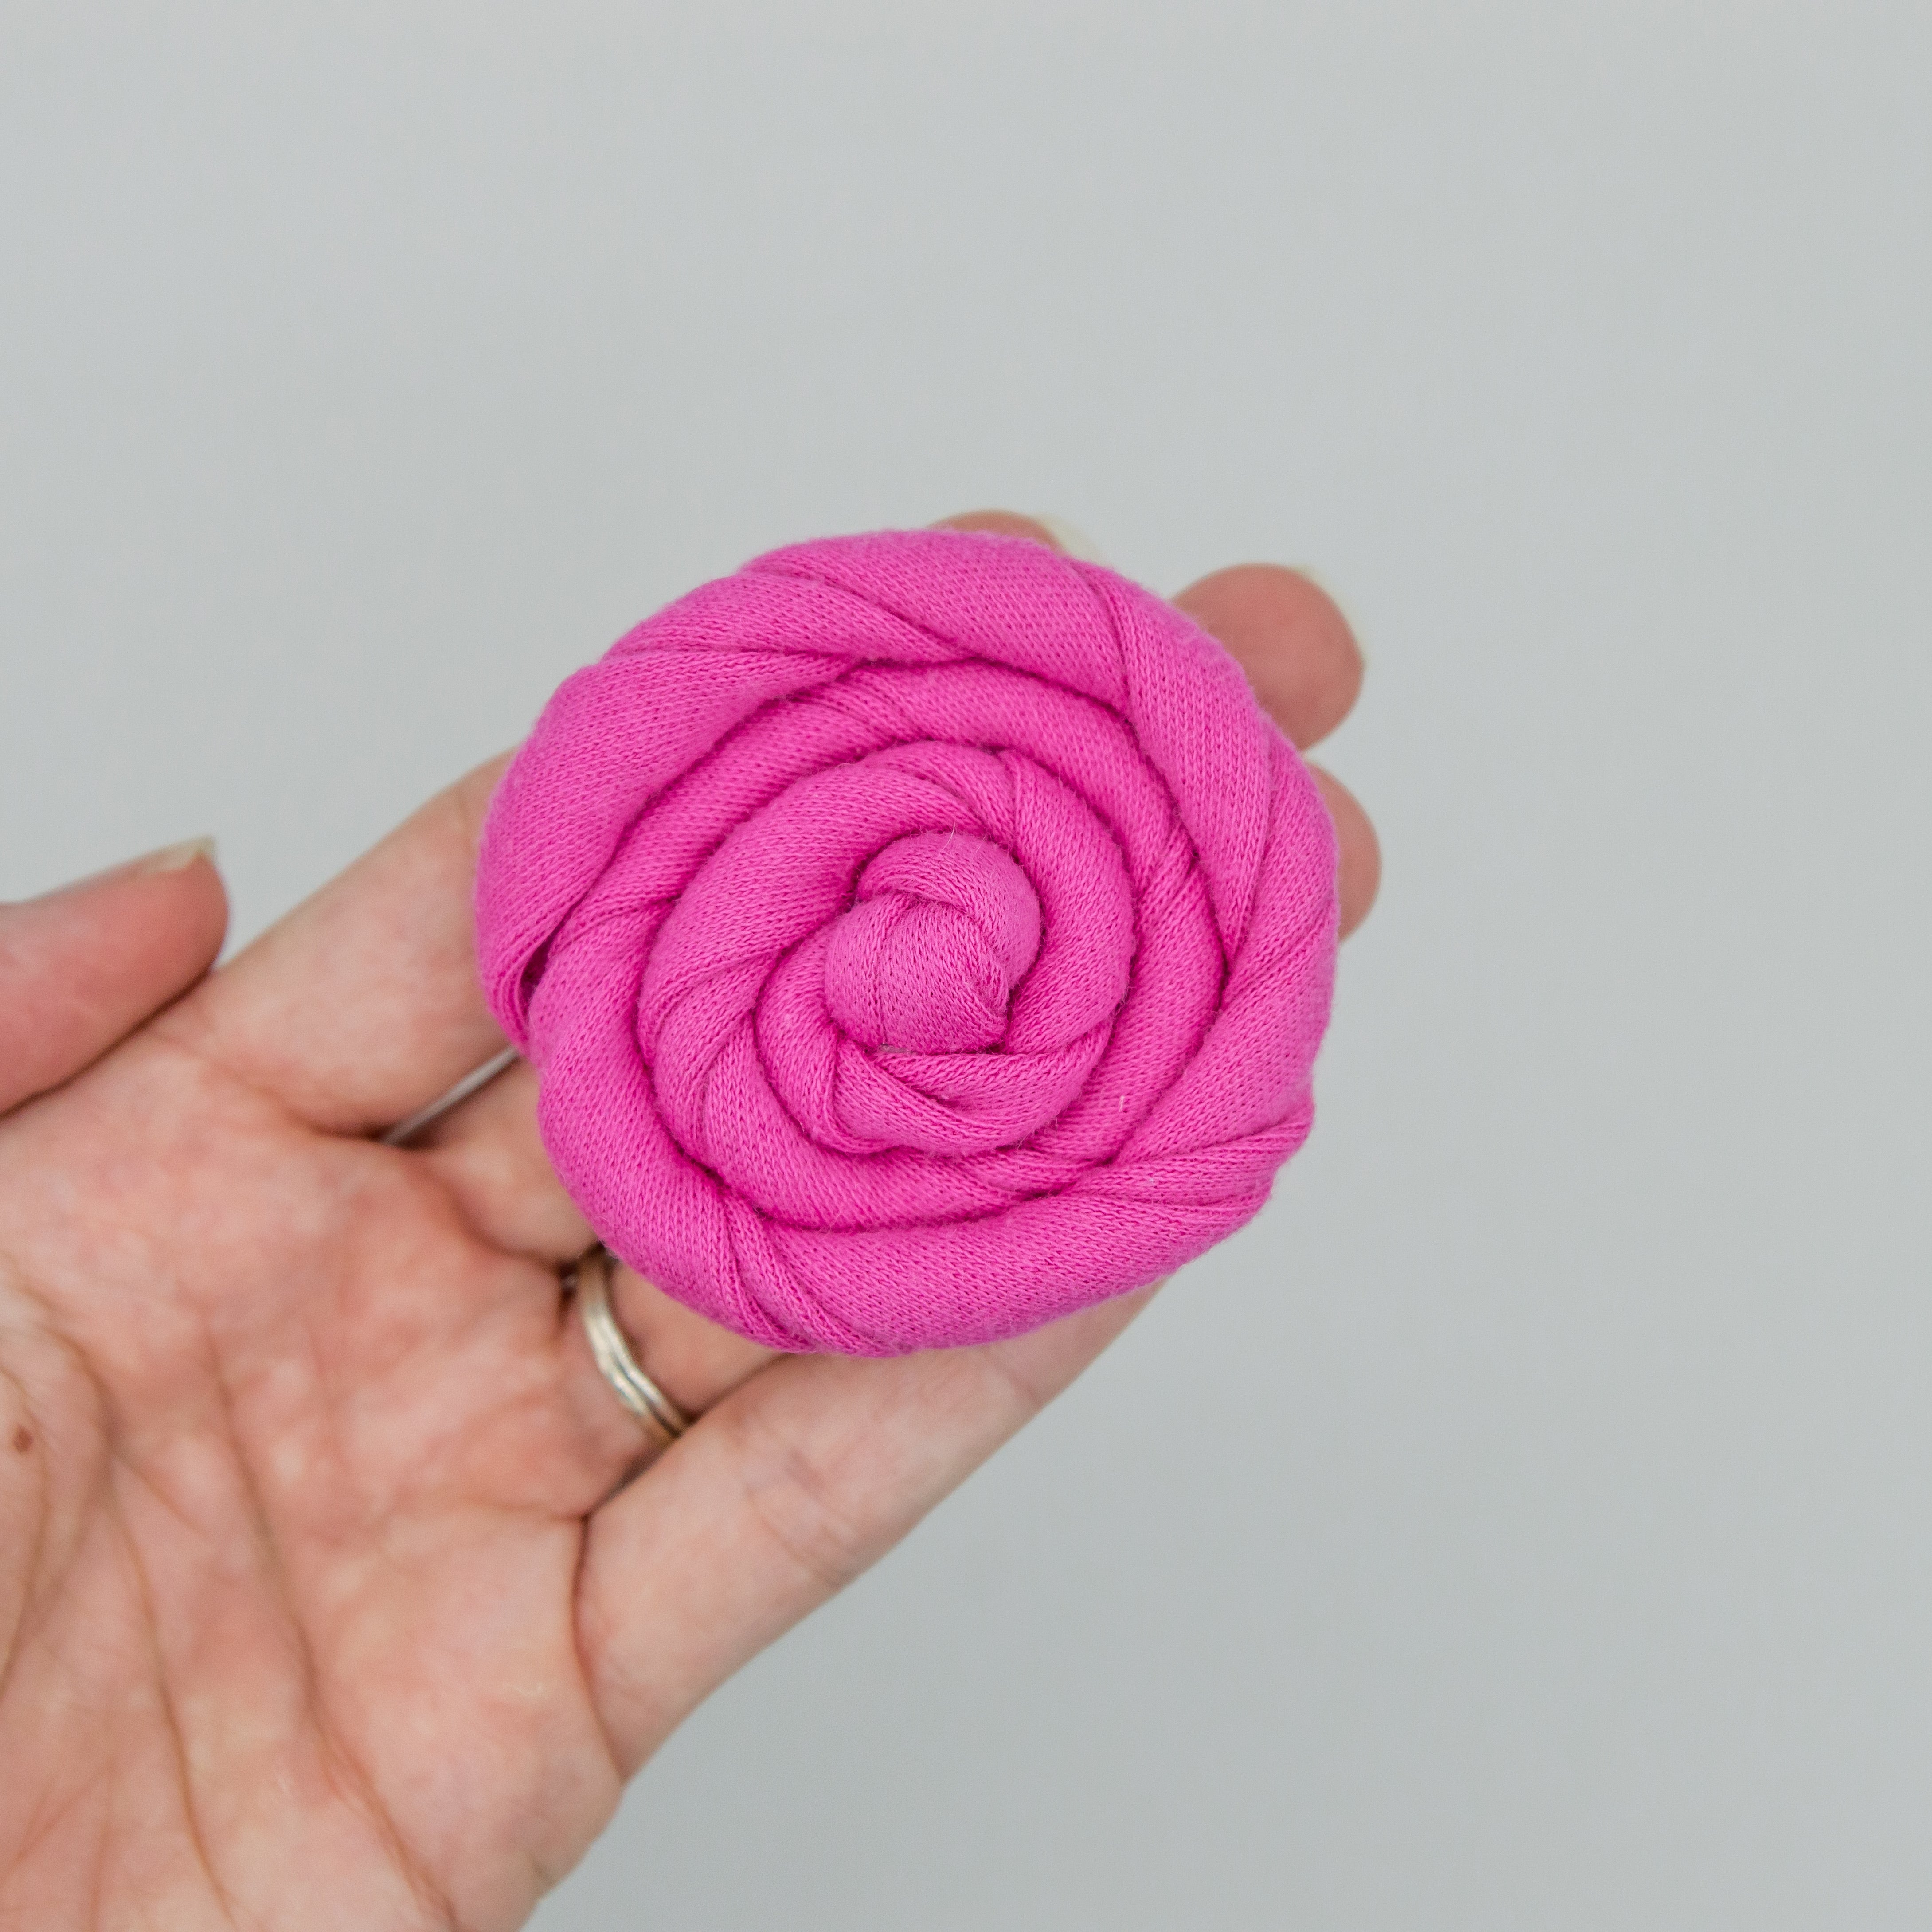 2.5 inch bright pink cotton rose - ATD kind